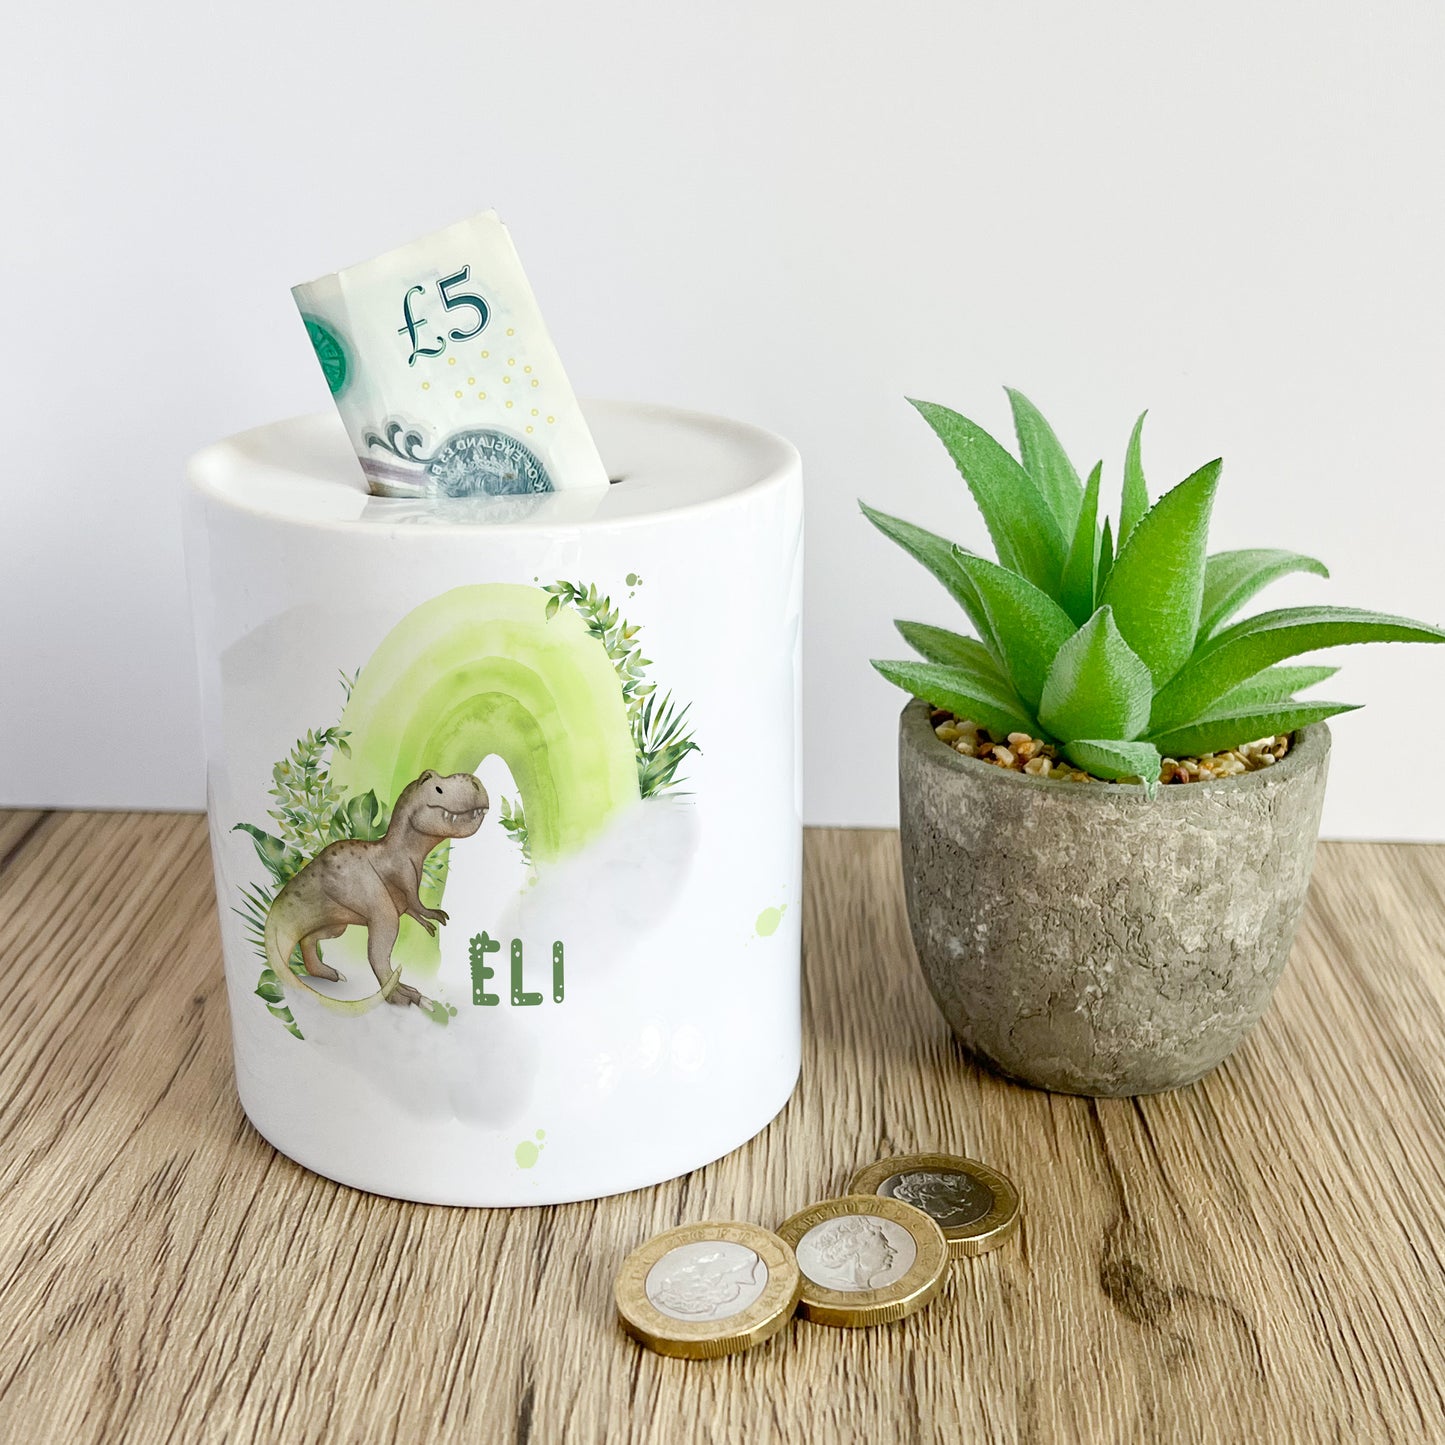 Personalised ceramic money box with a dinosaur and rainbow